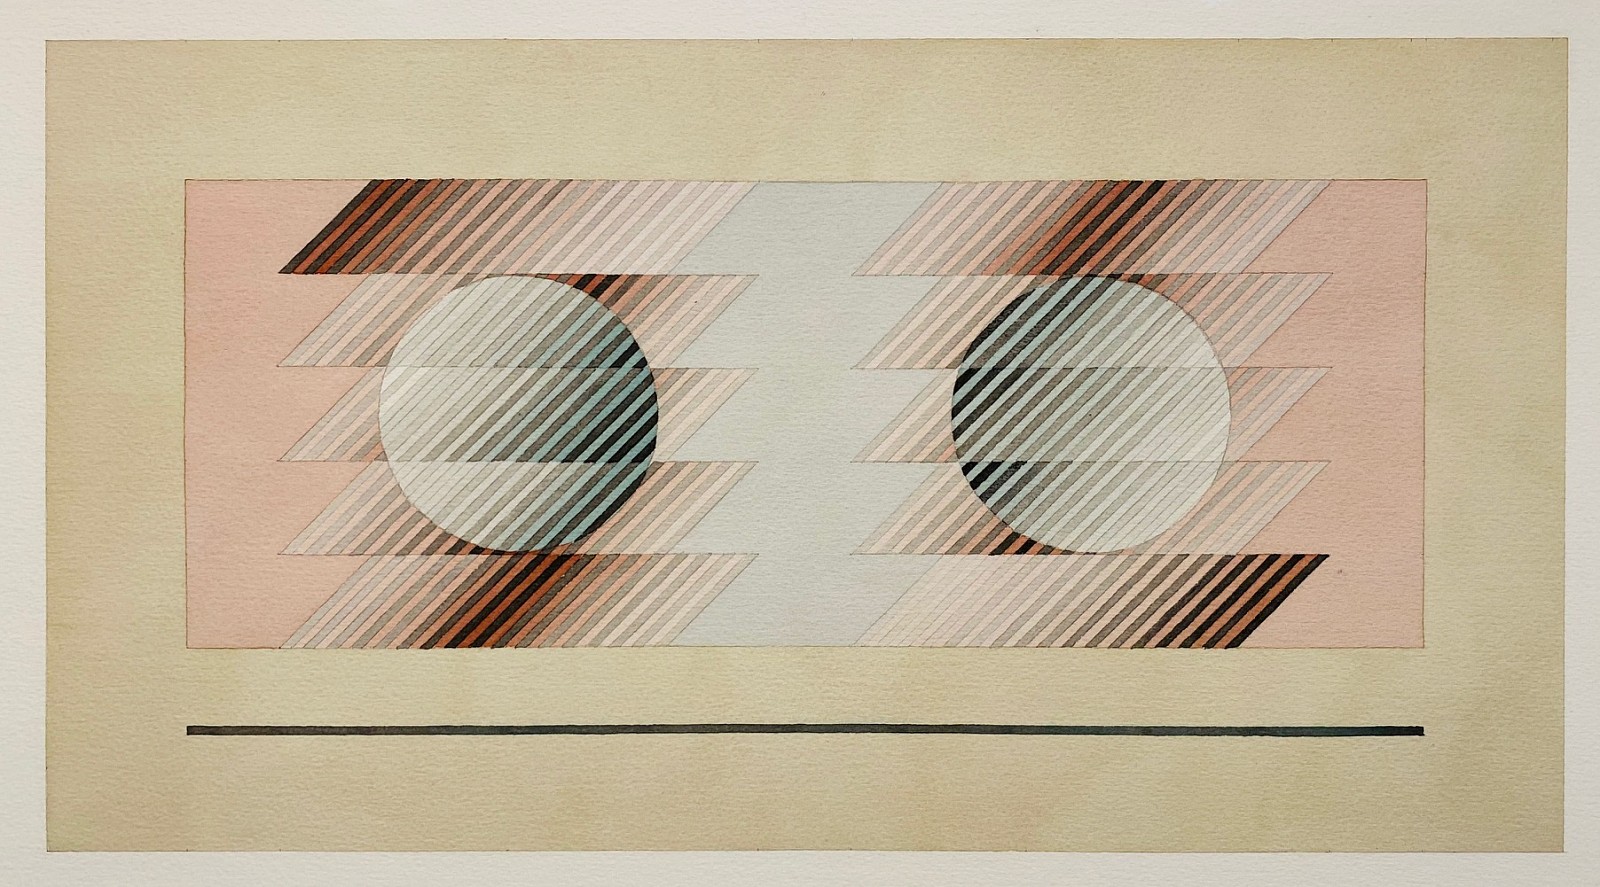 Sewell Sillman, 2 Orbs: Teal, Maroon and Pink
watercolor on paper, SS: 18"" x 24""  IS: 11"" x 20 1/2""
JCA 6396
$4,500